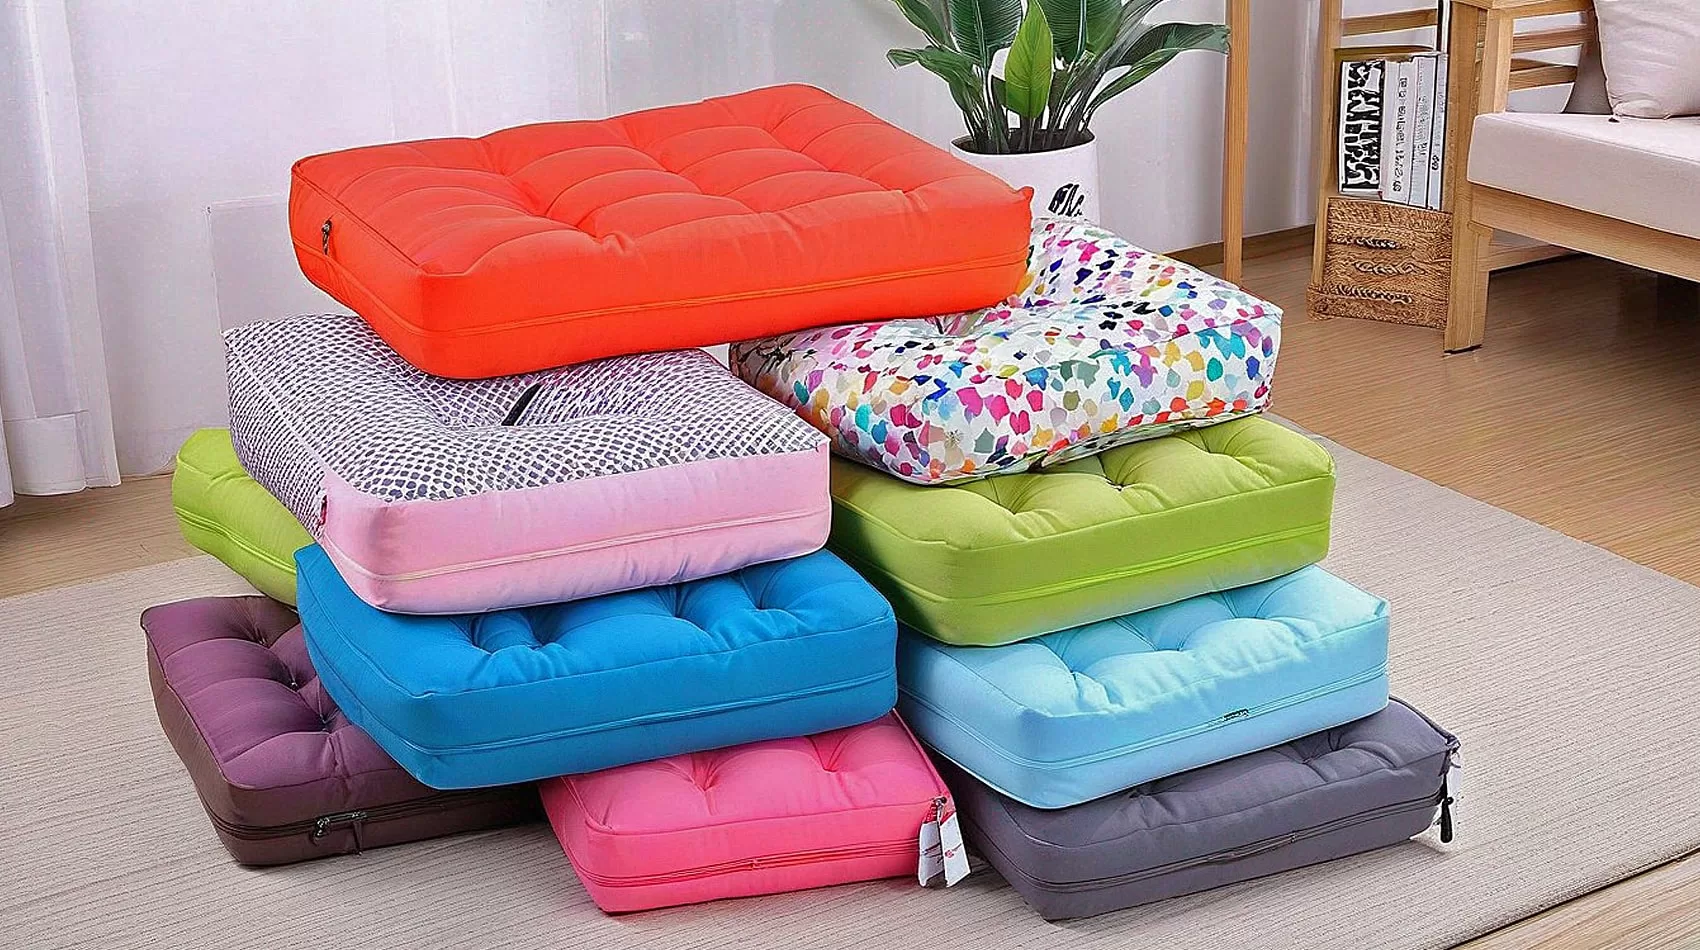 Zippered Cushion Covers for Sofas,
Zippered Couch Cushion Covers
